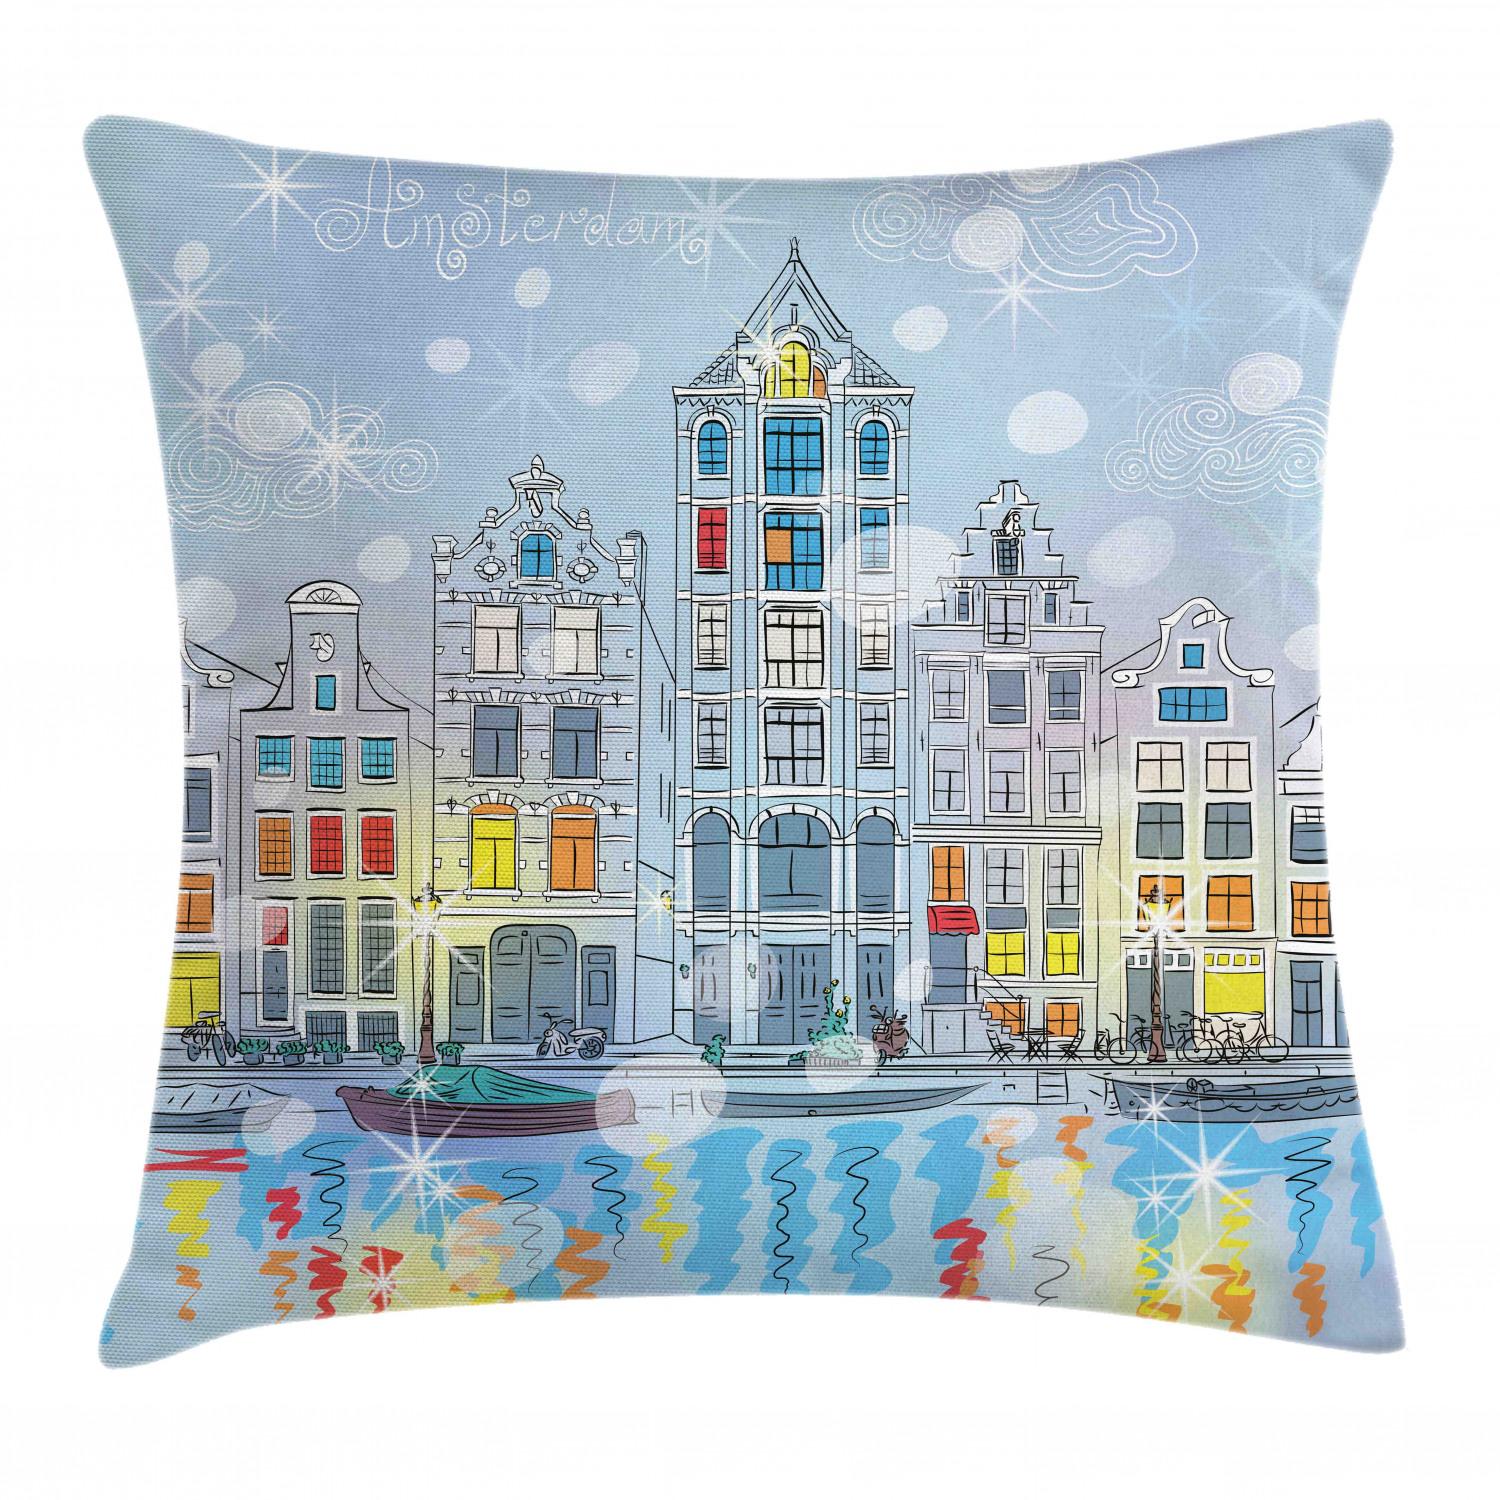 Christmas Throw Pillow Cushion Cover, Noel Time at Amsterdam Canal with Historical Famous Buildings North Europe Design, Decorative Square Accent Pillow Case, 16 X 16 Inches, Multicolor, by Ambesonne - image 1 of 2